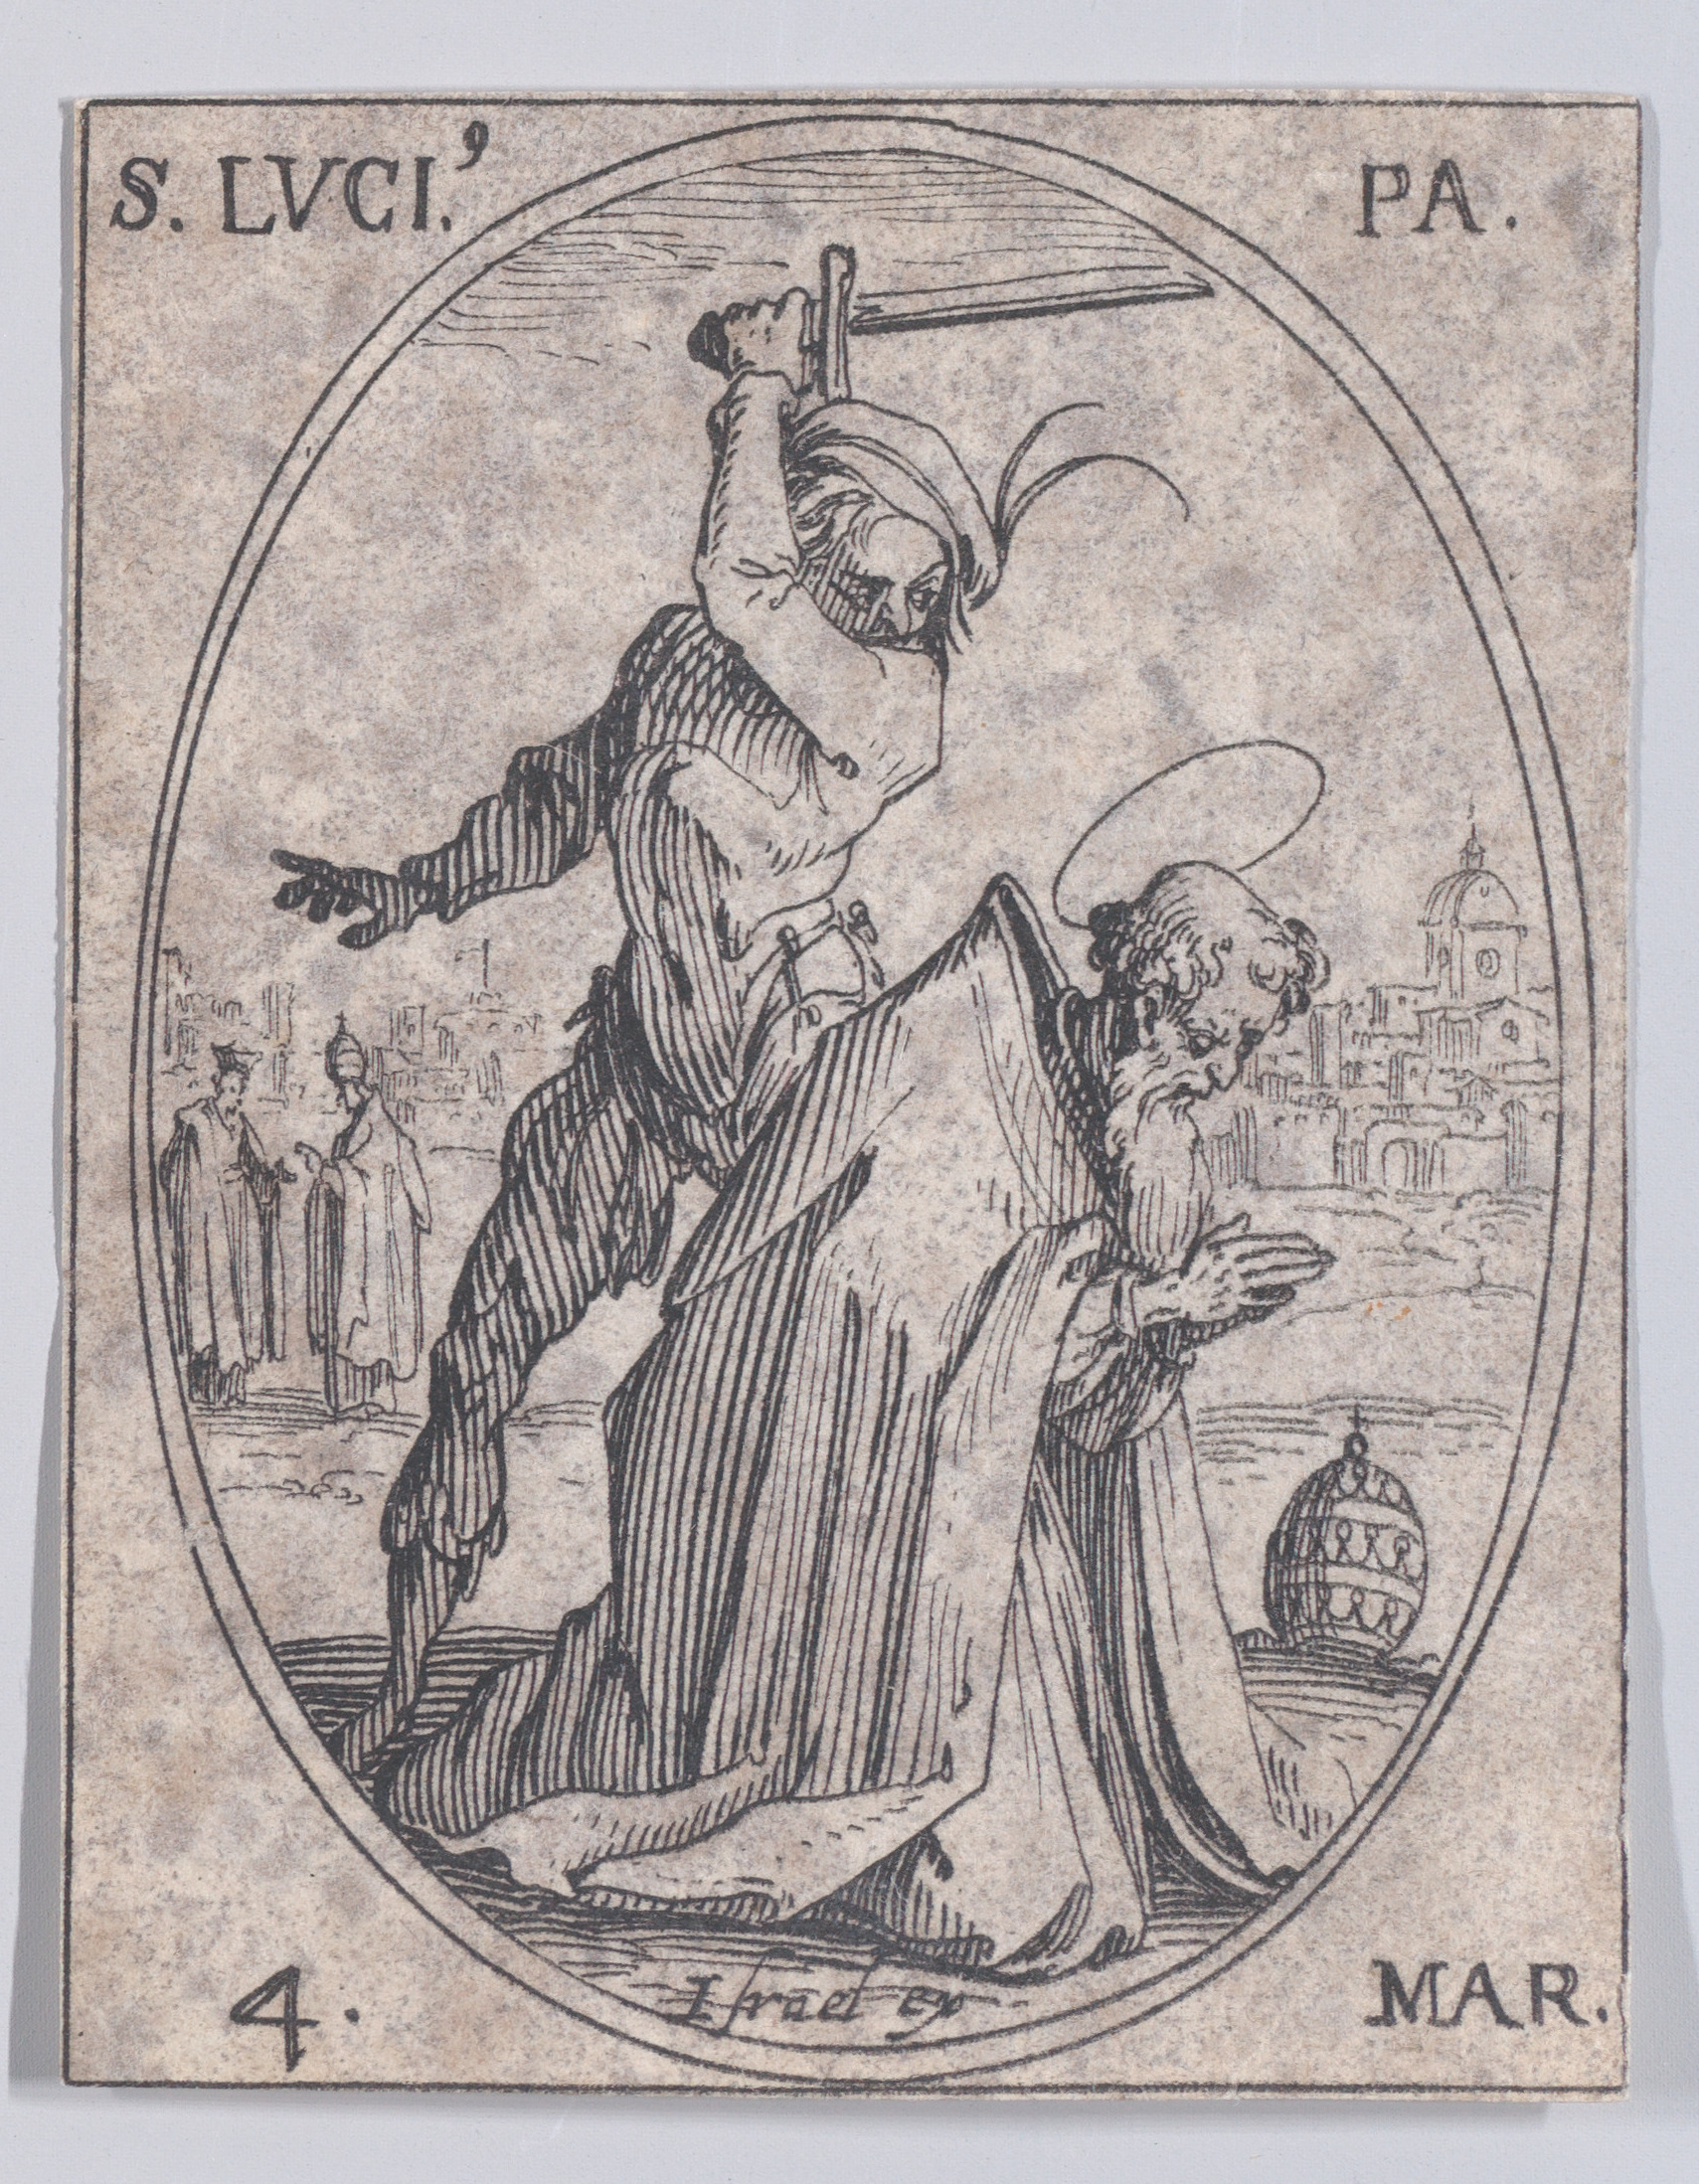 S. Lucius, pape (St. Lucius, Pope), March 4th, from Les Images De Tous Les Saincts et Saintes de L'Année (Images of All of the Saints and Religious Events of the Year), Jacques Callot (French, Nancy 1592–1635 Nancy), Etching; second state of two (Lieure)